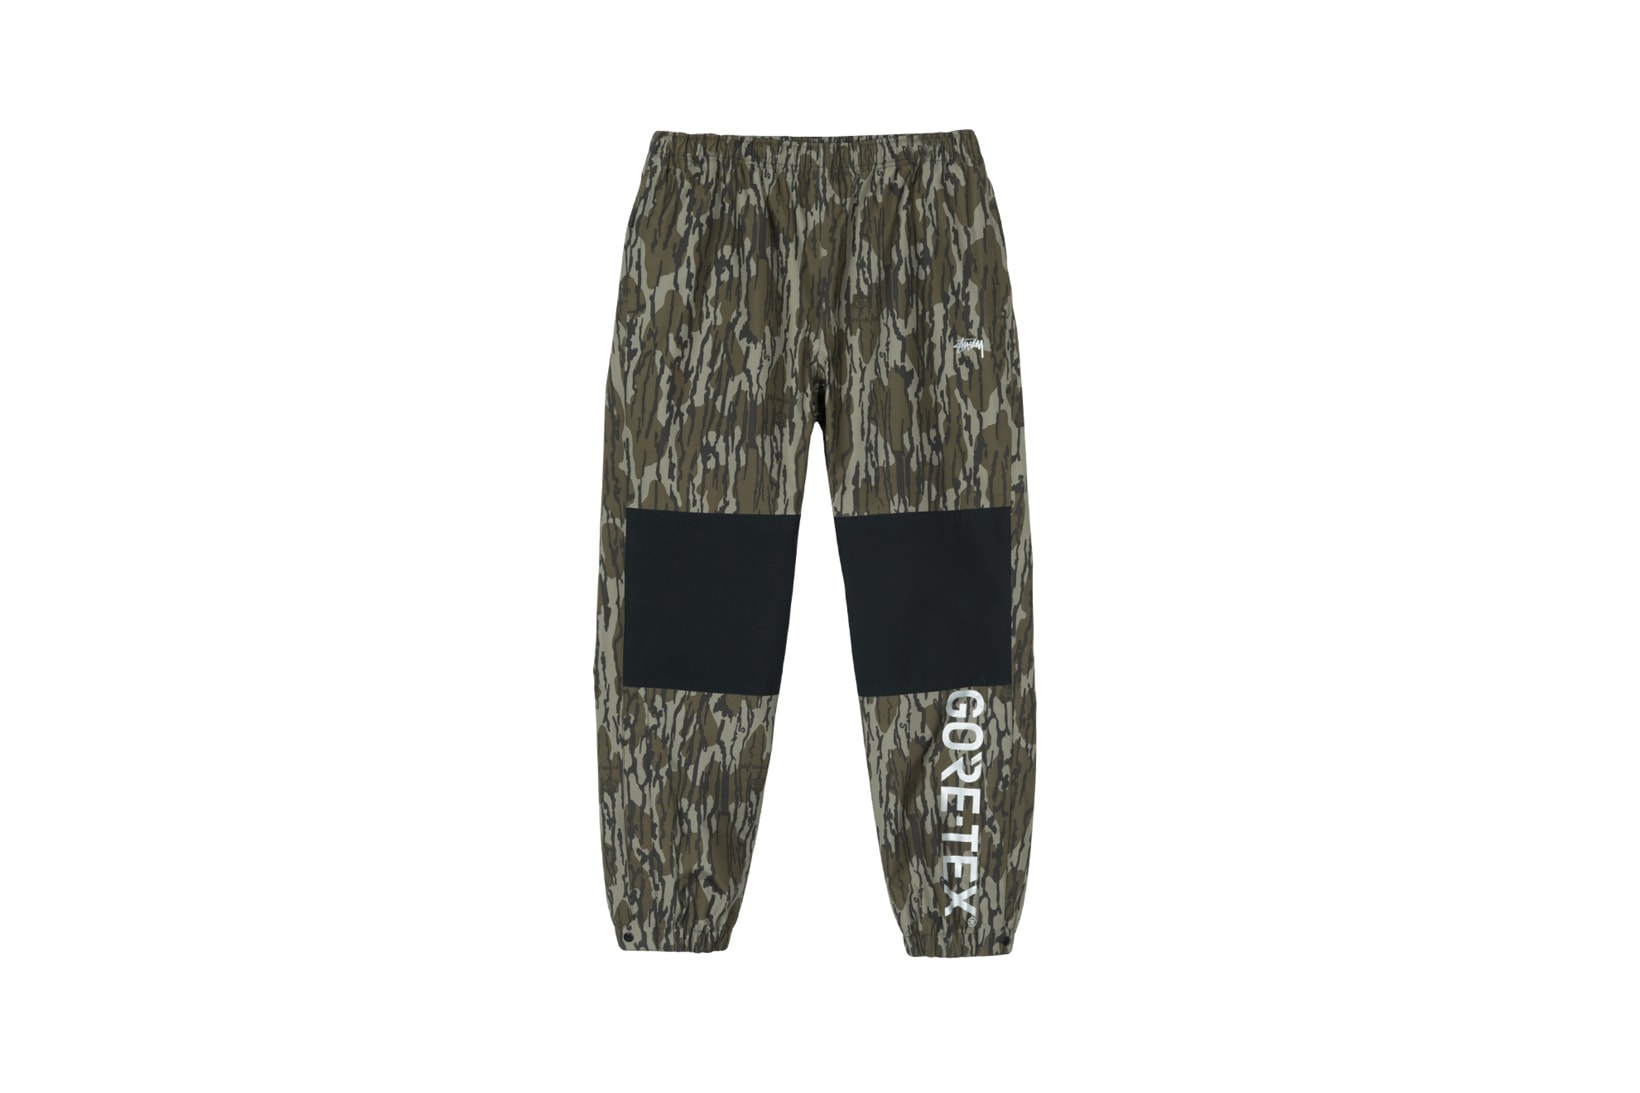 Stussy x GORE-TEX Shell Pant Camouflage